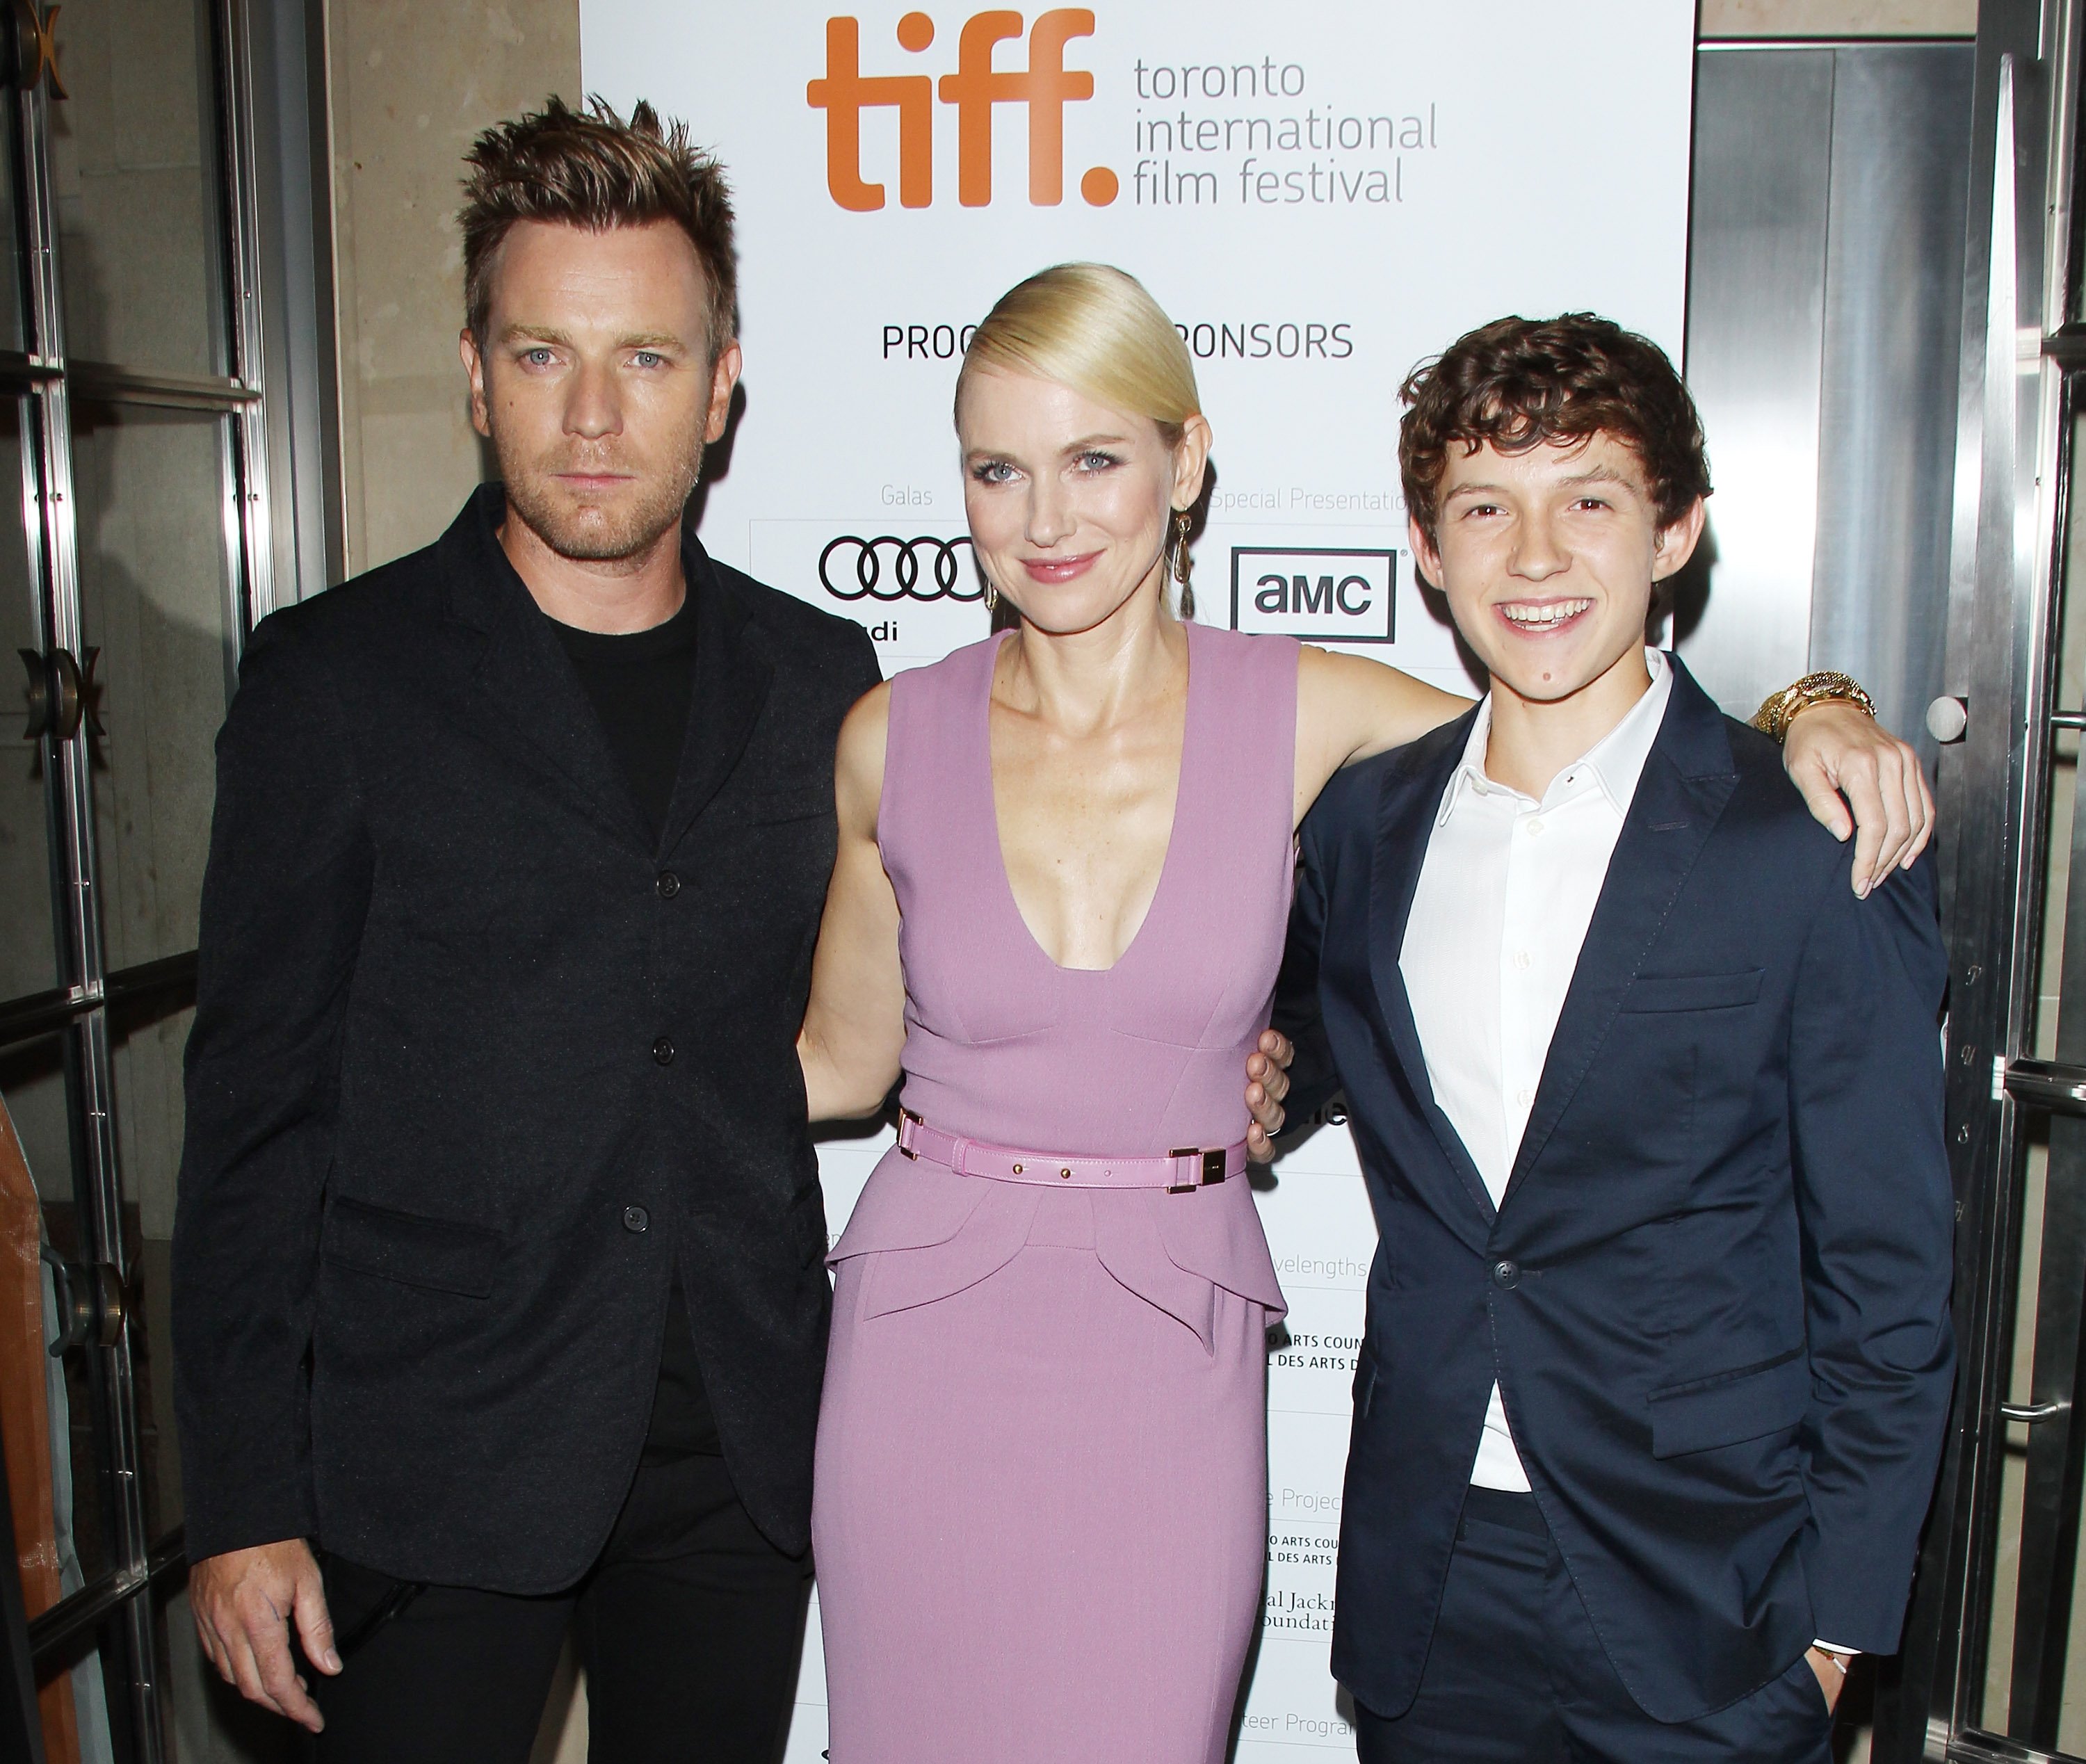 2012-09-09-TIFF-The-Impossible-Premiere-058.jpg